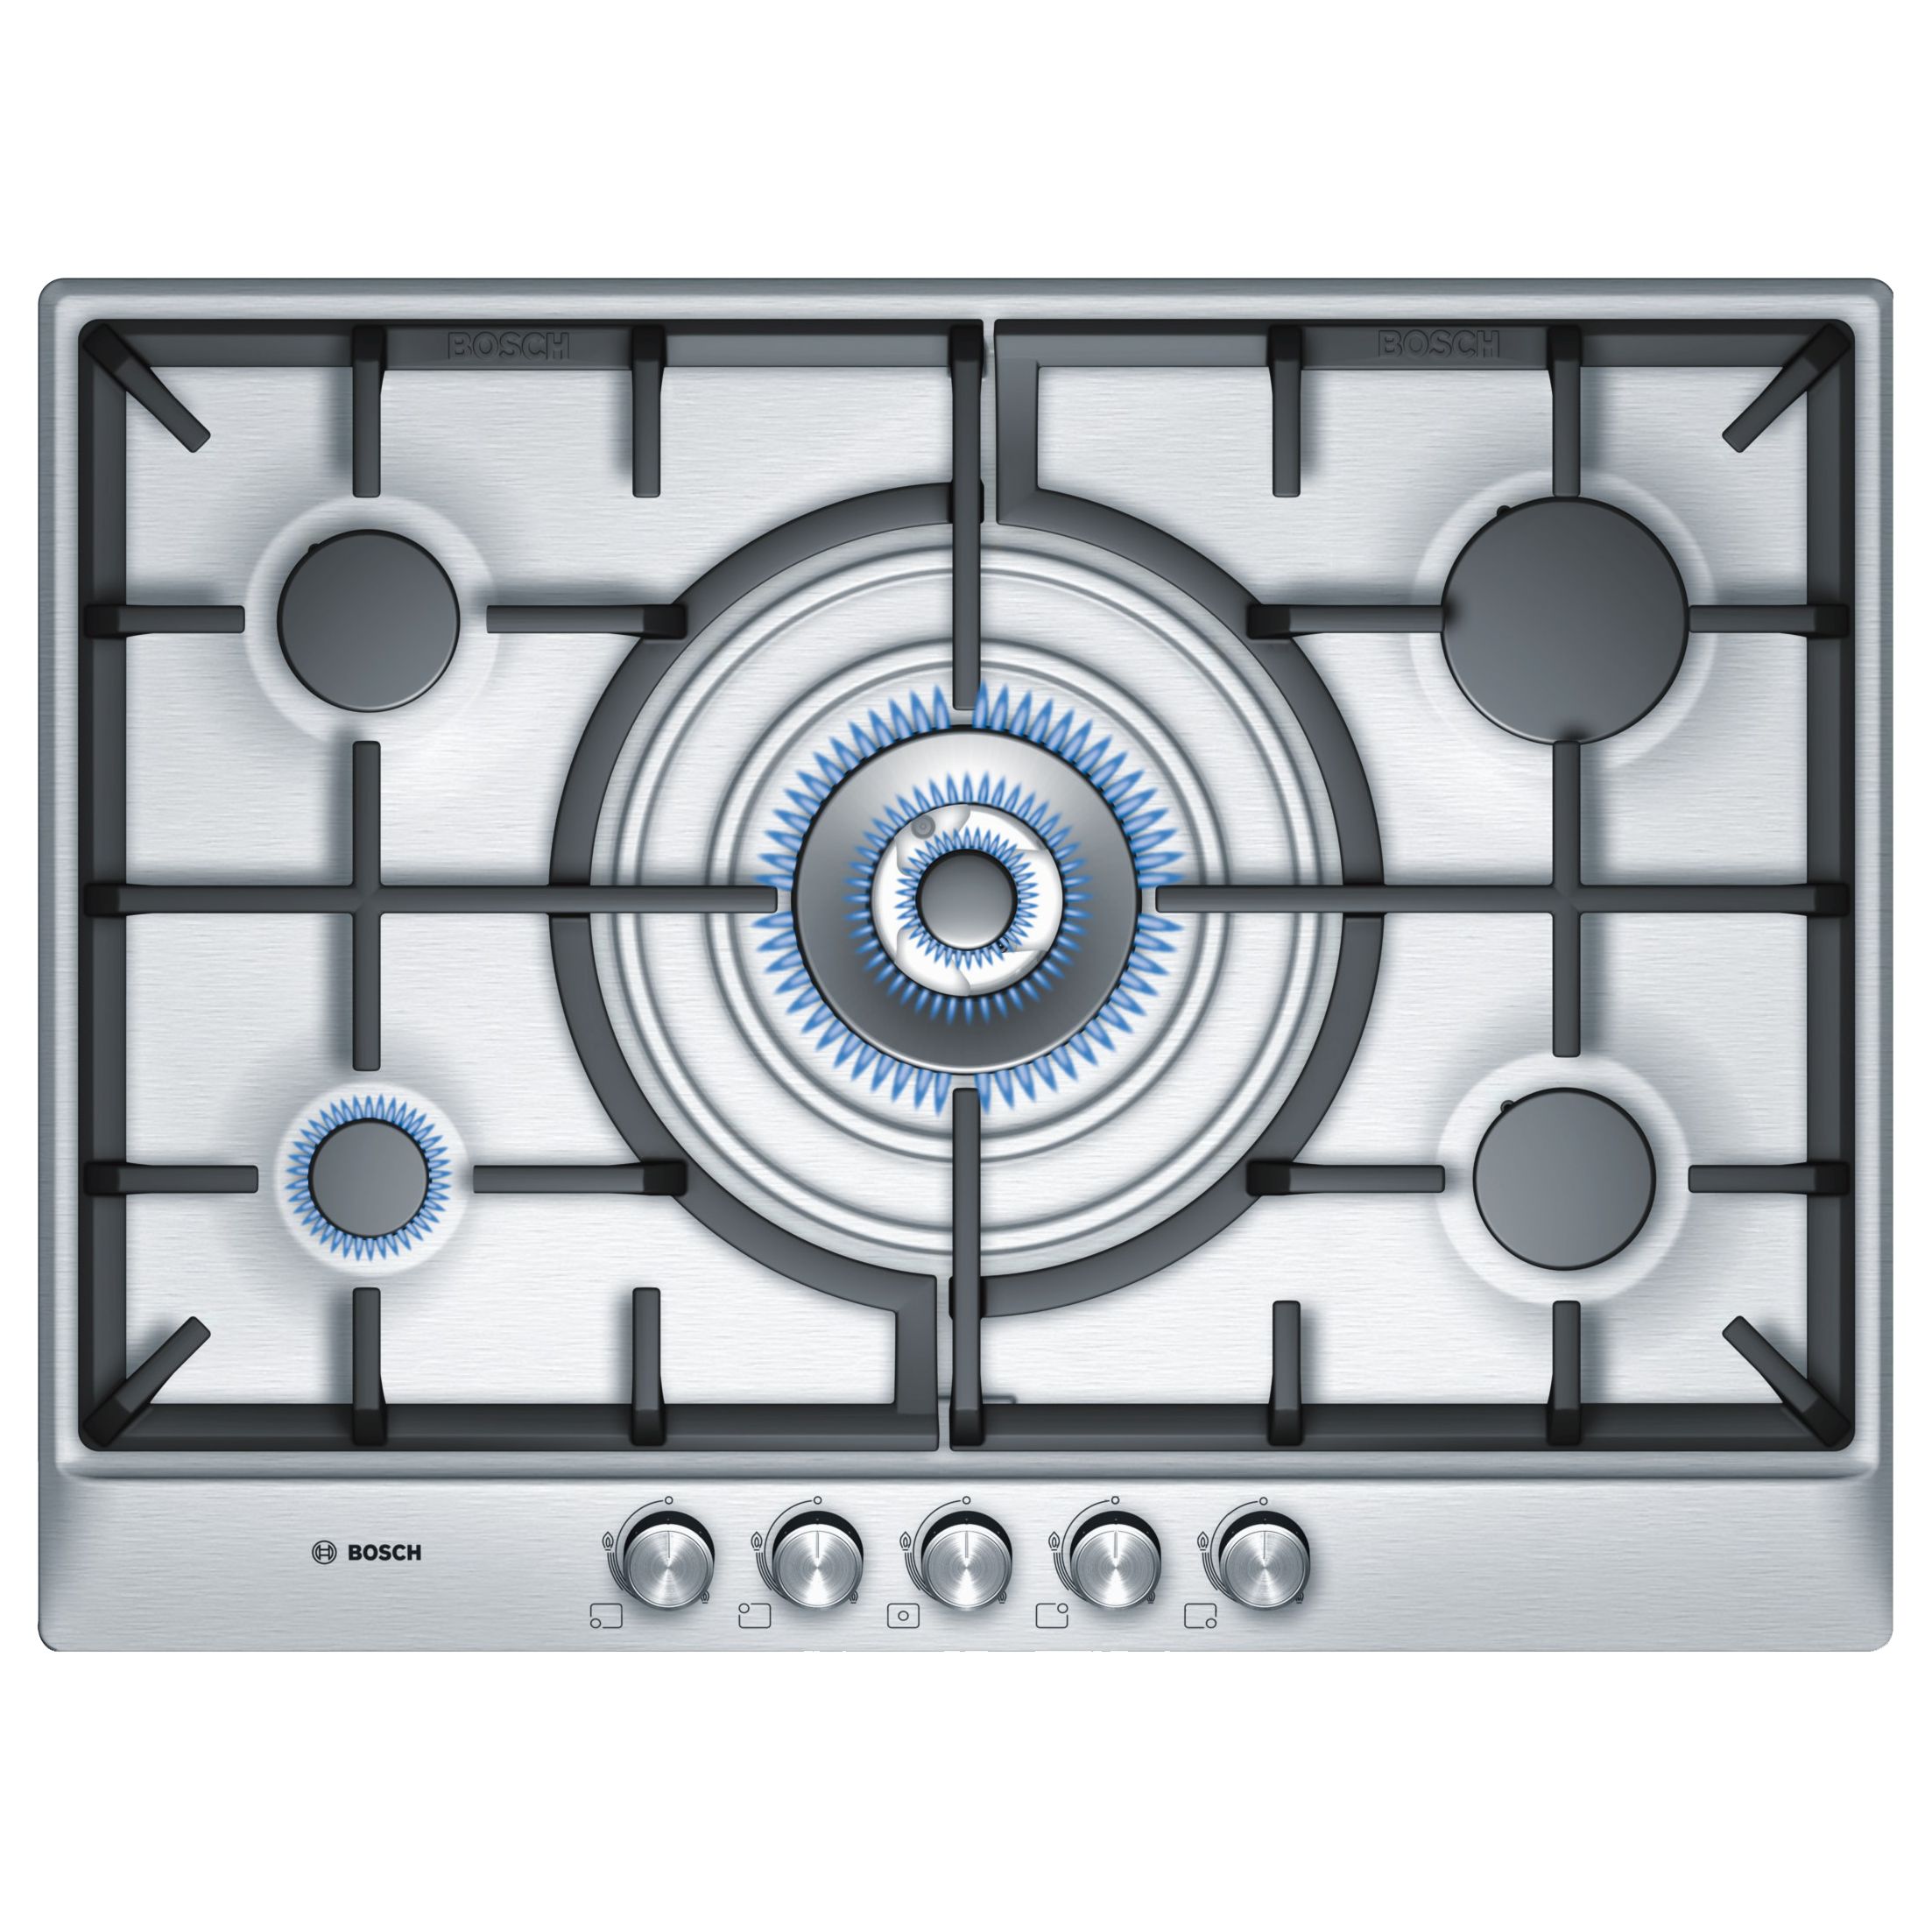 Bosch PCQ715B90E Gas Hob, Stainless Steel at John Lewis